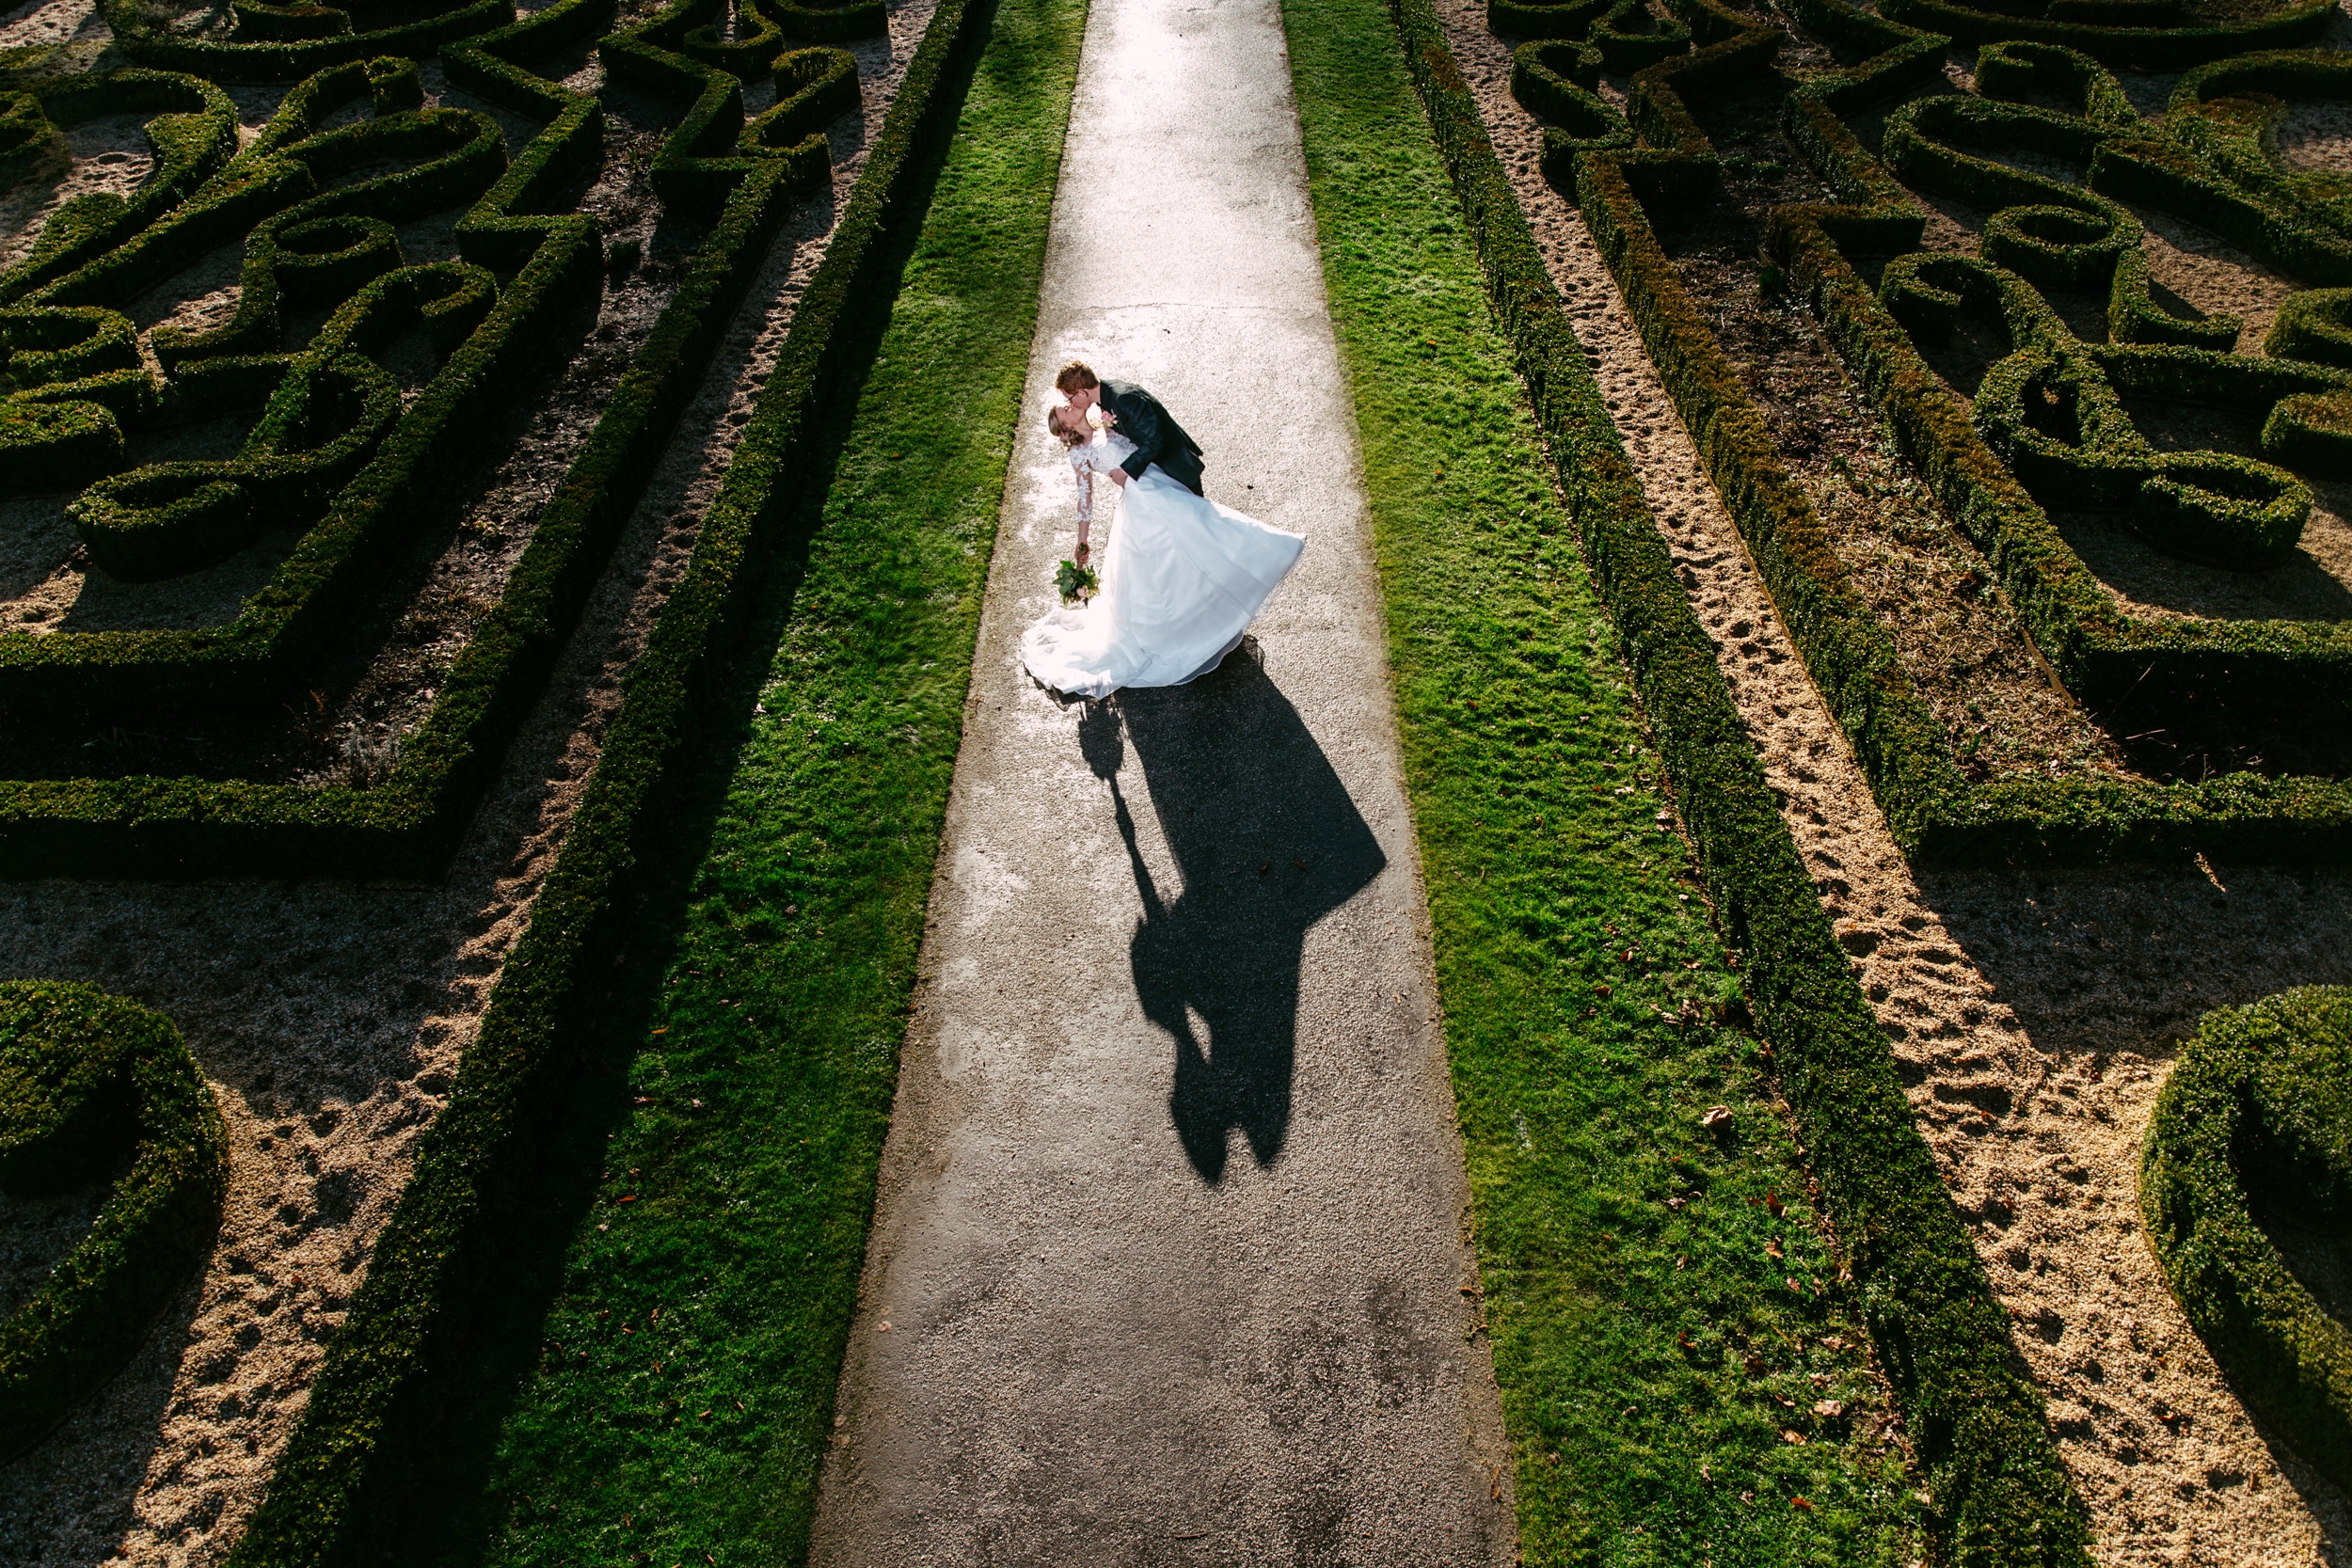 Wedding in the forest - A bride and groom walk through a maze.